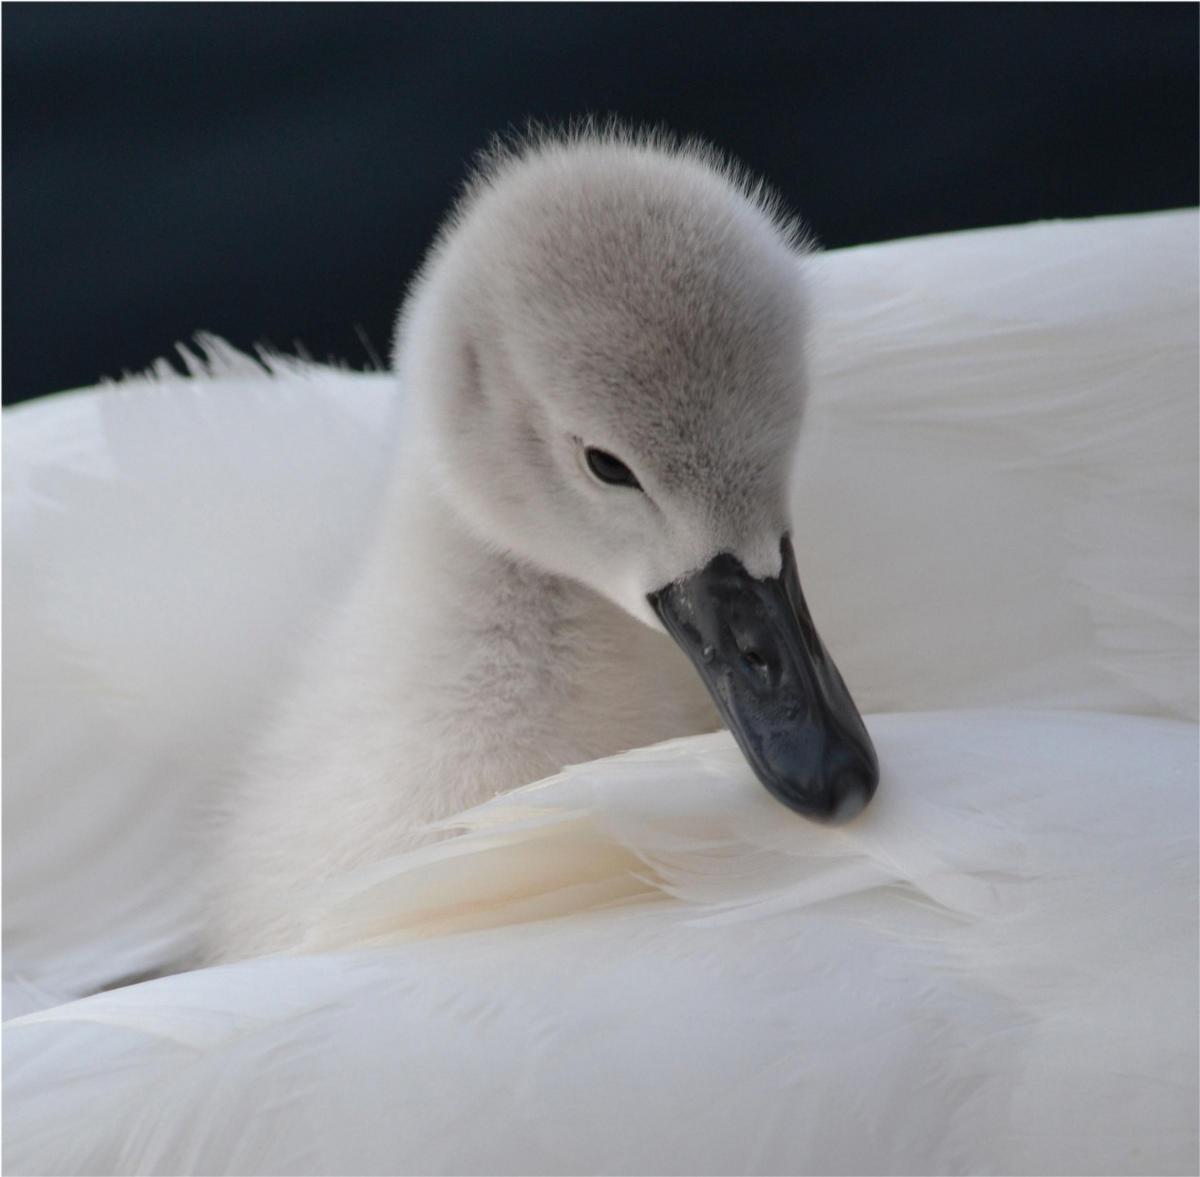 'Cygnet with Swan' taken by Seren Waite, the winning photograph in the Under-12 category